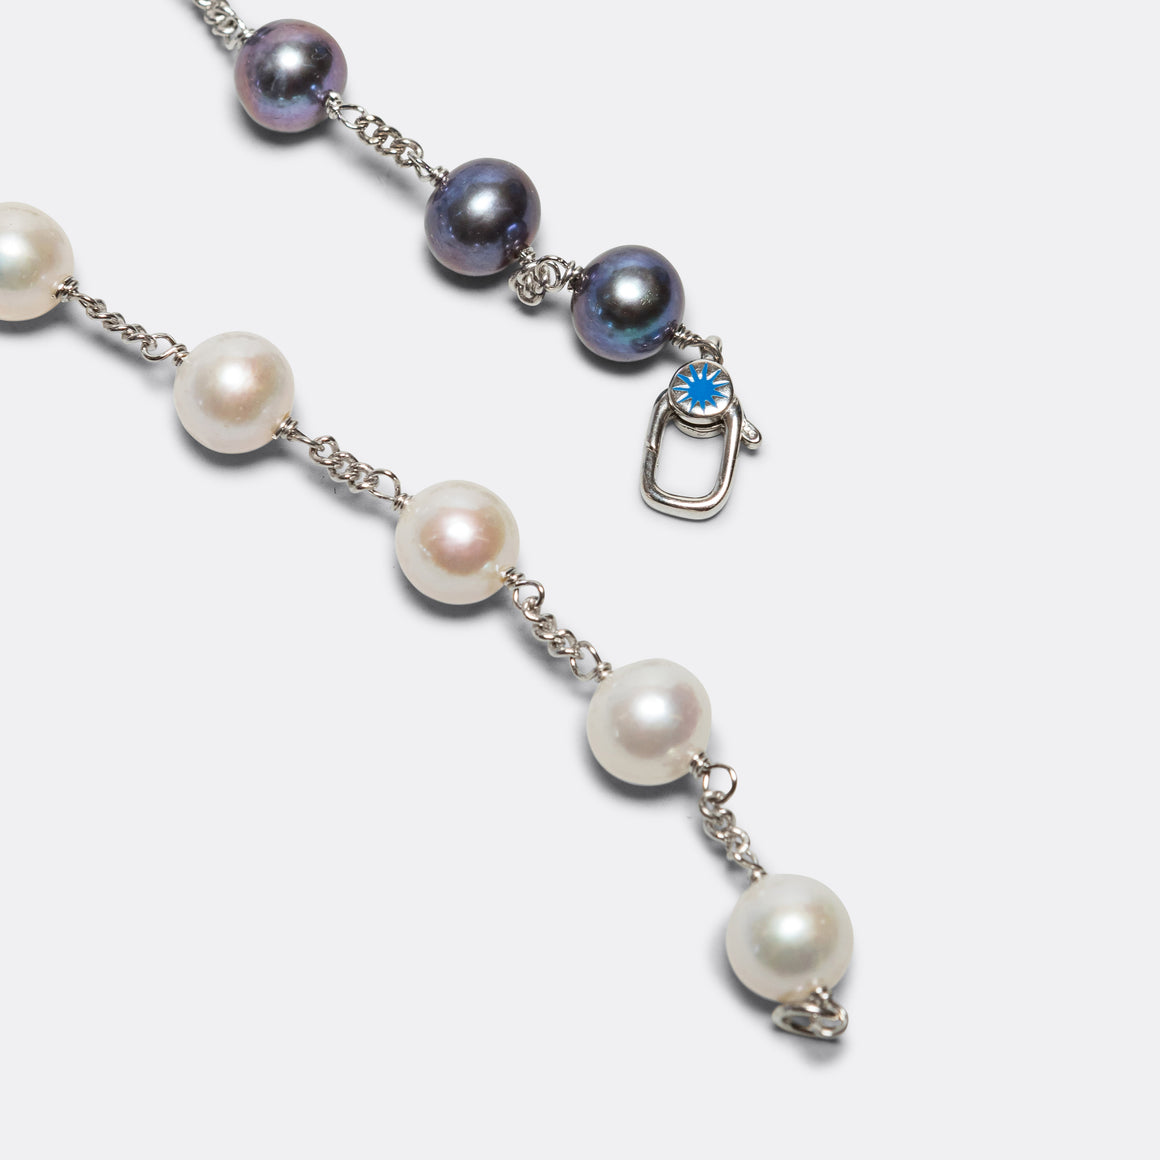 Polite Worldwide - Wisdom Pearl Necklace - 925 Silver - UP THERE